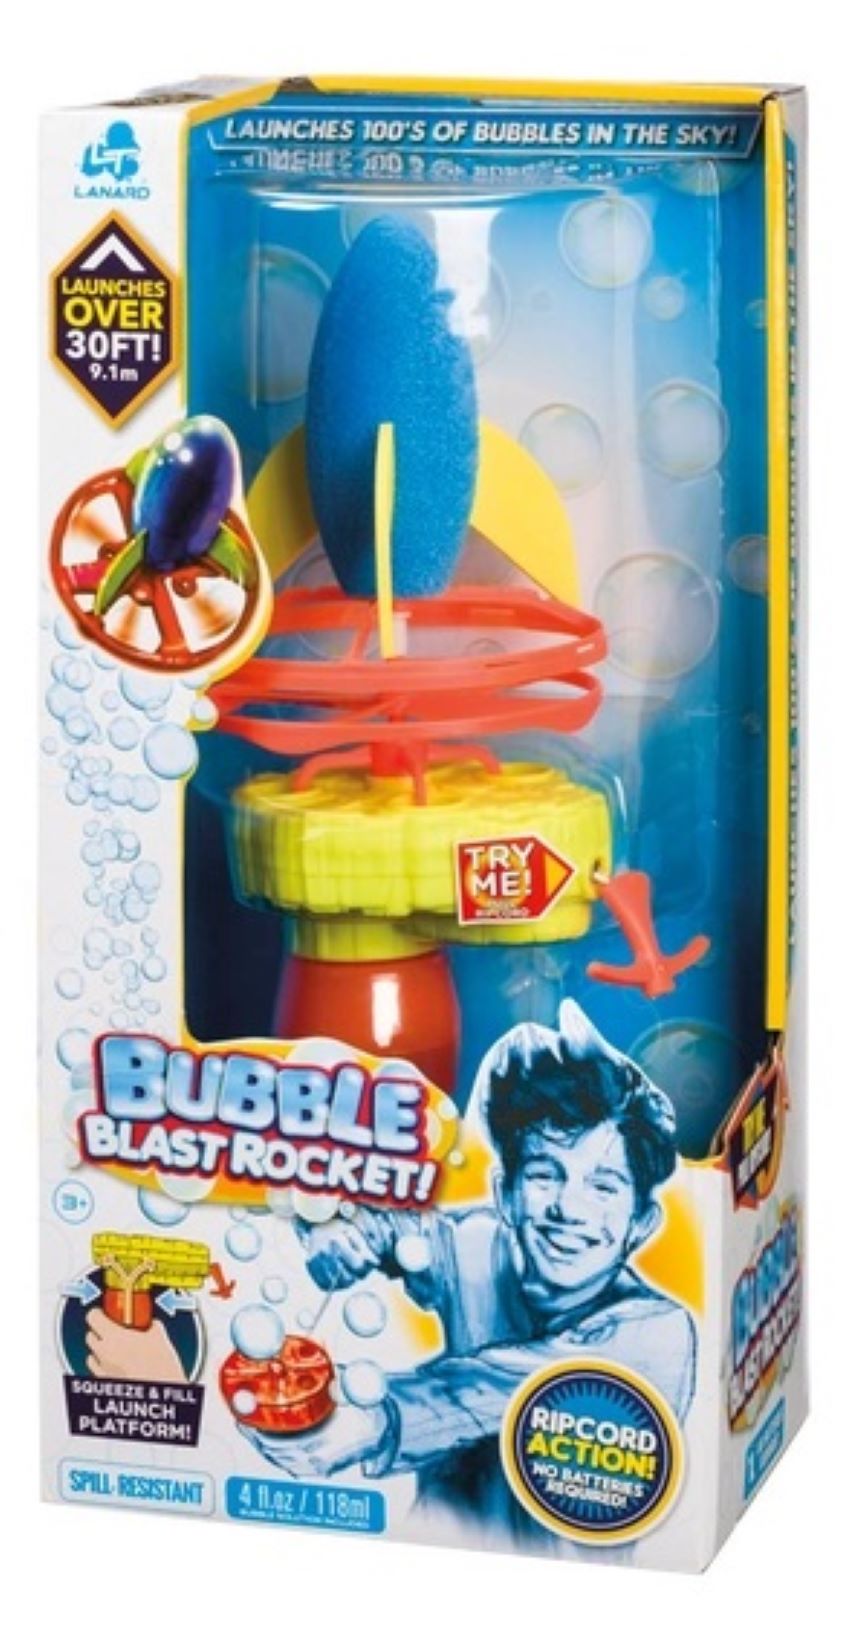 Bubble Blast Rocket - Launches Over 30 Feet!